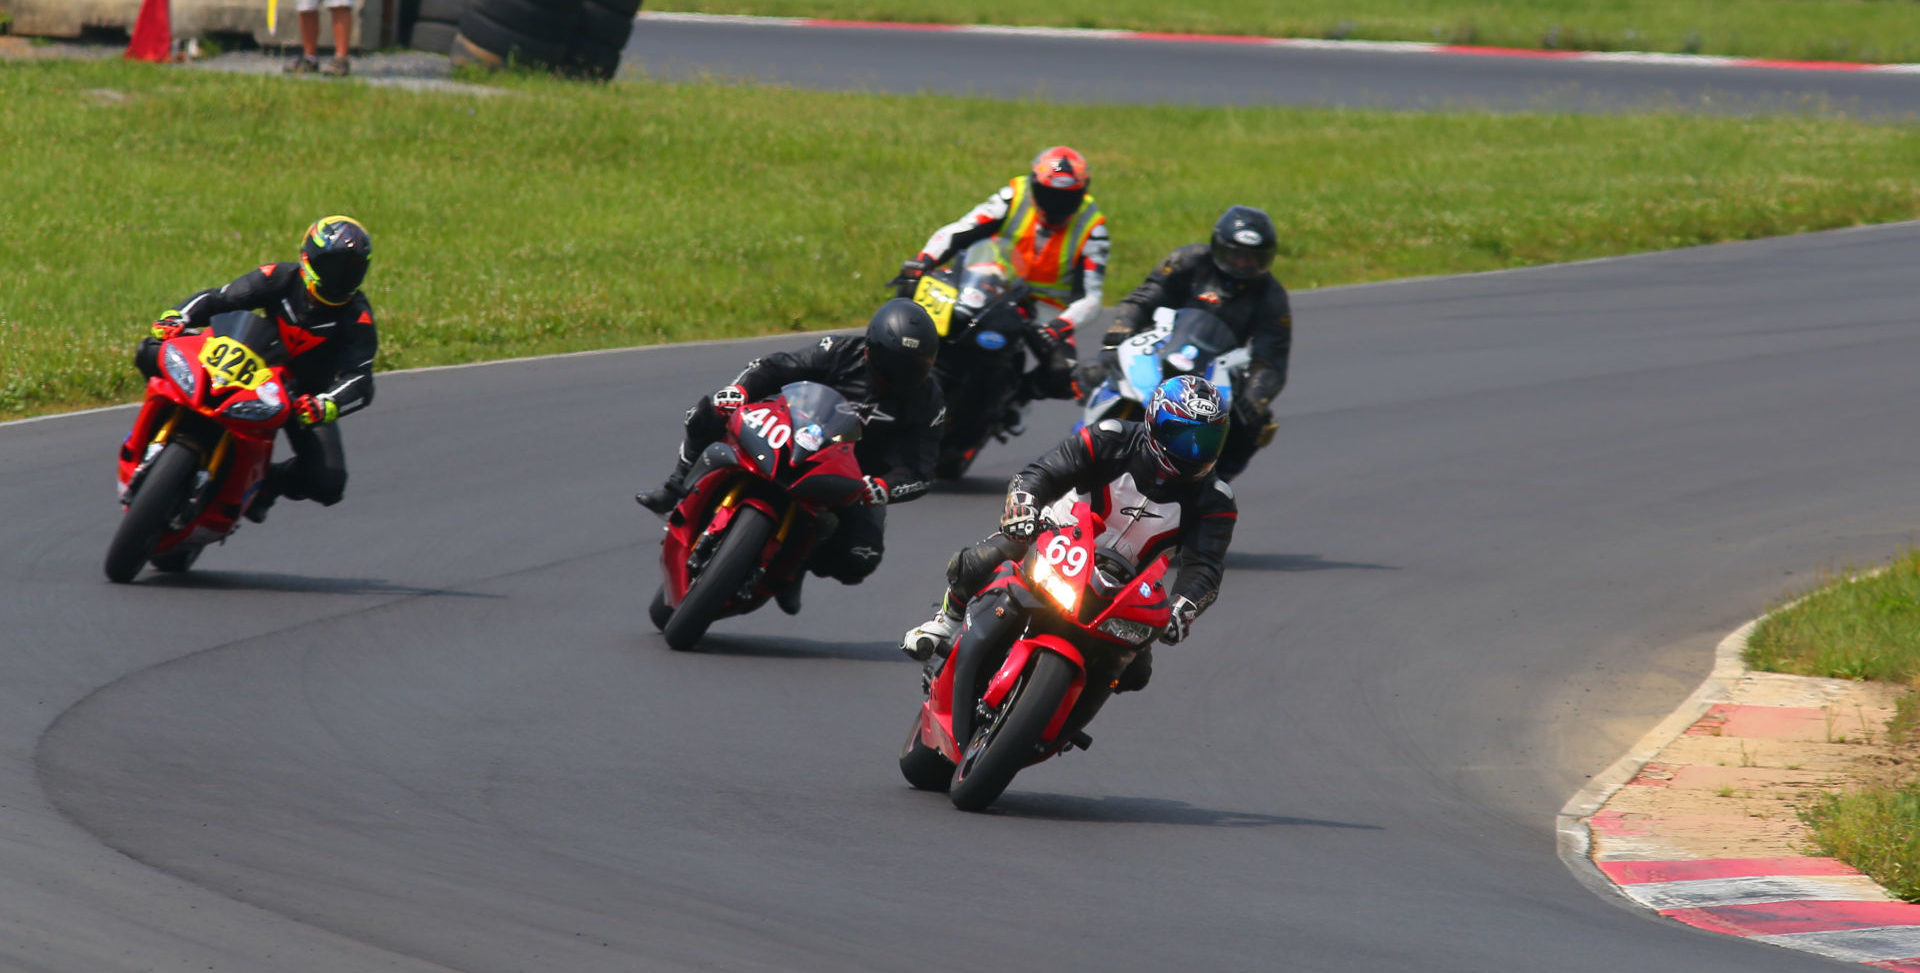 A scene from a Roger Lyle’s Motorcycle Xcitement Track Days and Road Racing School at Summit Point Motorsports Park, in West Virginia. Photo by etechphoto.com.